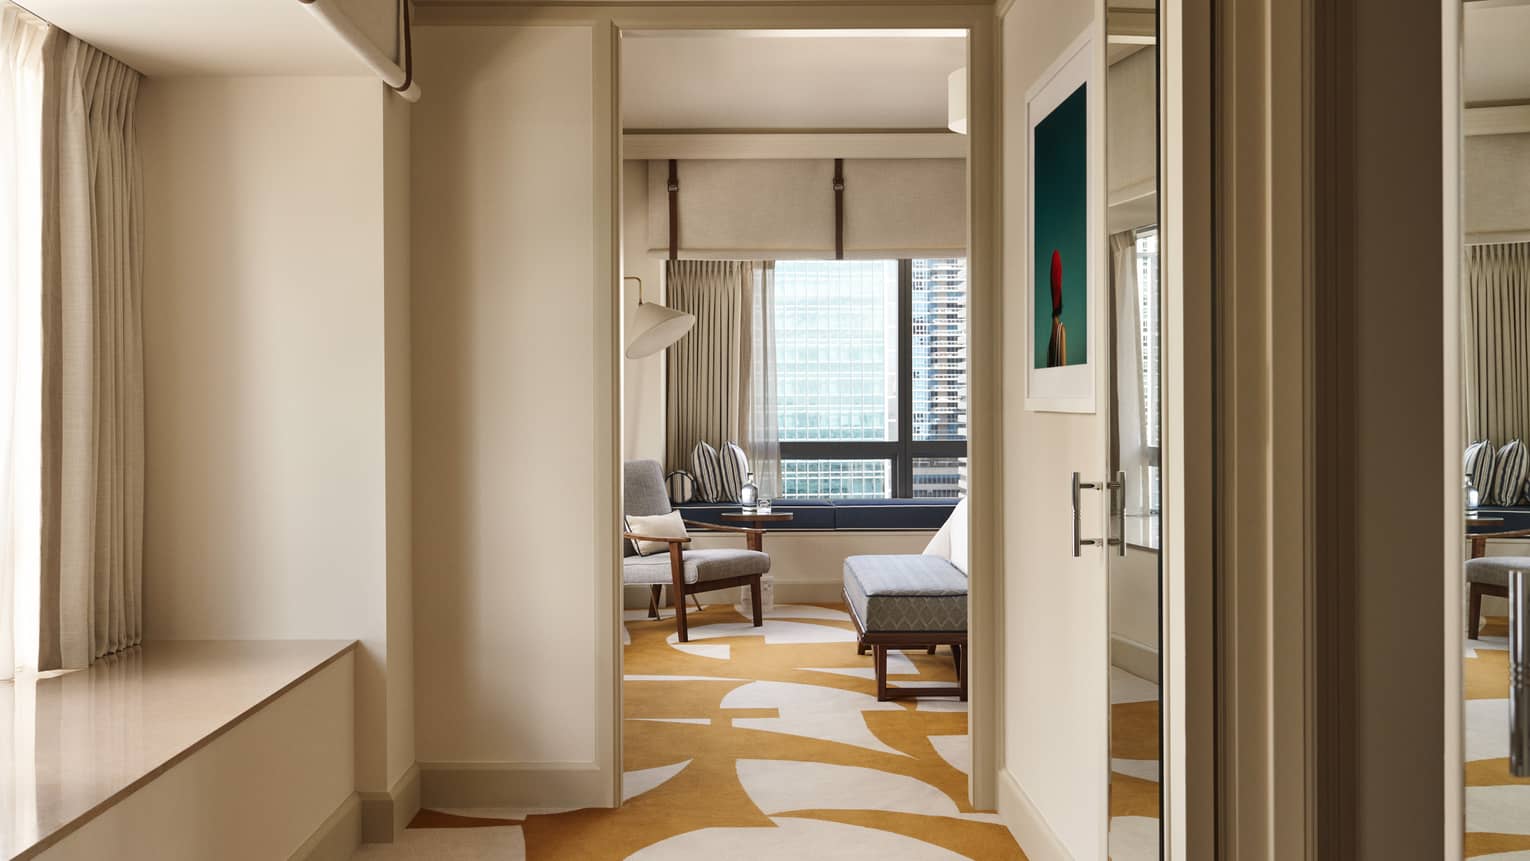 View through an open doorway into a luxurious one-bedroom suite at the Four Seasons Hotel in Miami, showcasing a modern living area with stylish furniture, including a plush grey sofa and matching armchairs. The suite features a geometric patterned rug and large windows that provide a sweeping view of the city skyline. The interior design combines contemporary elegance with comfort, highlighted by soft, natural lighting and neutral colour tones.